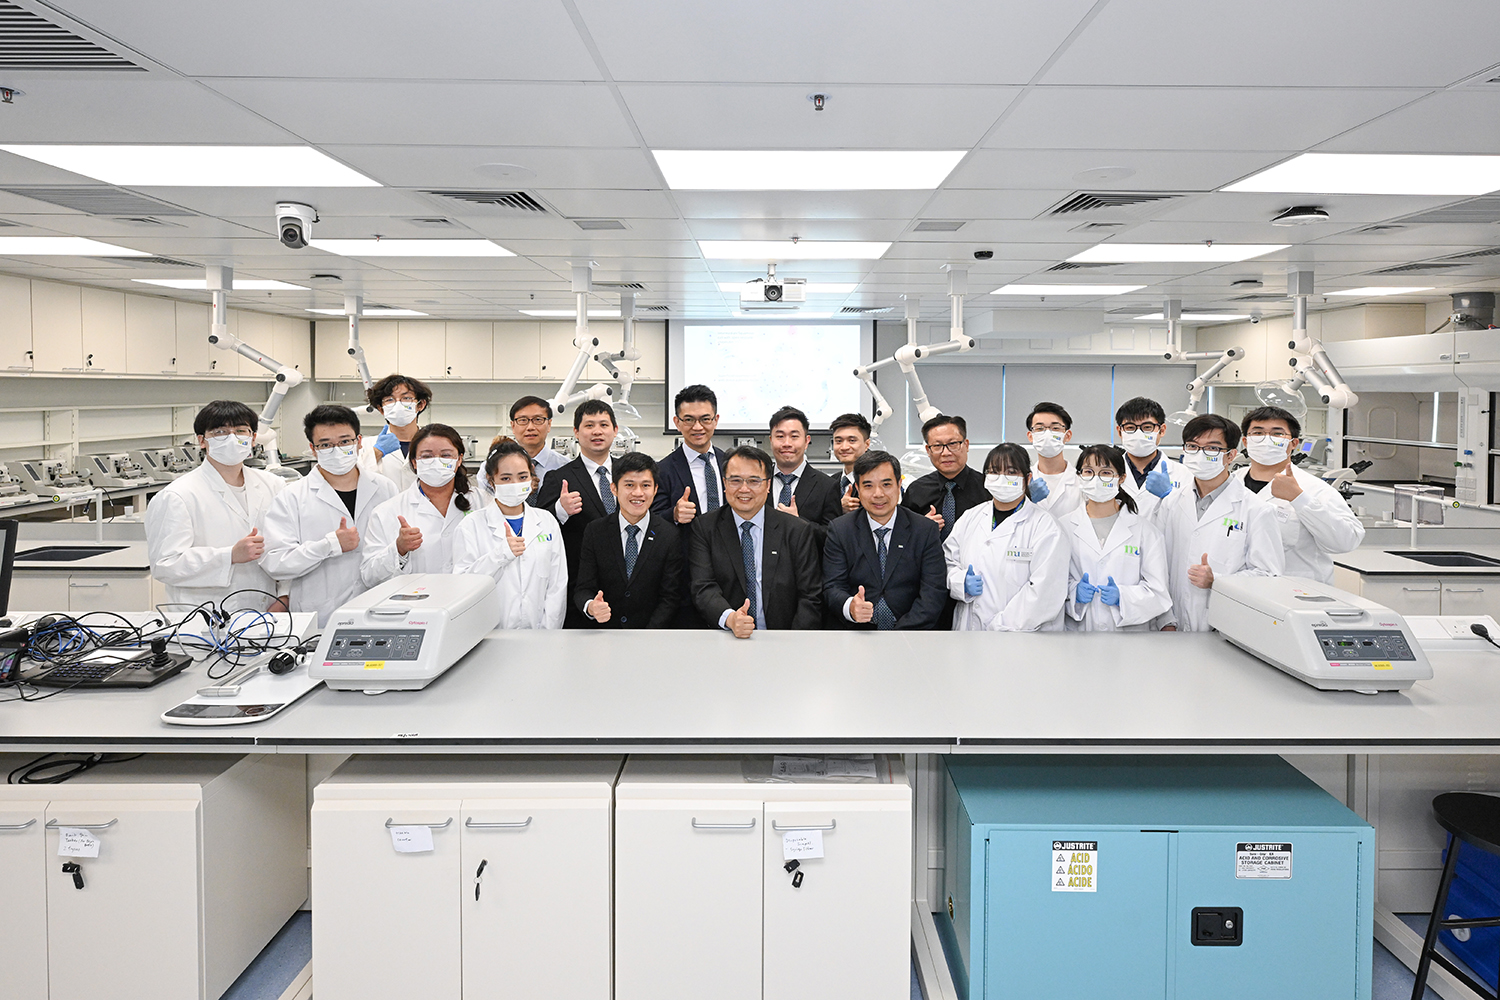 HKMU School of Science and Technology Dean Prof. Philips Wang Fu-lee (front row, centre), Associate Professor and Head of Applied Science Dr Steven Xu Jingliang (front row, fifth right), Associate Professor and programme leader Dr Cheung Ka-tik (front row, fifth left), and the laboratory team.